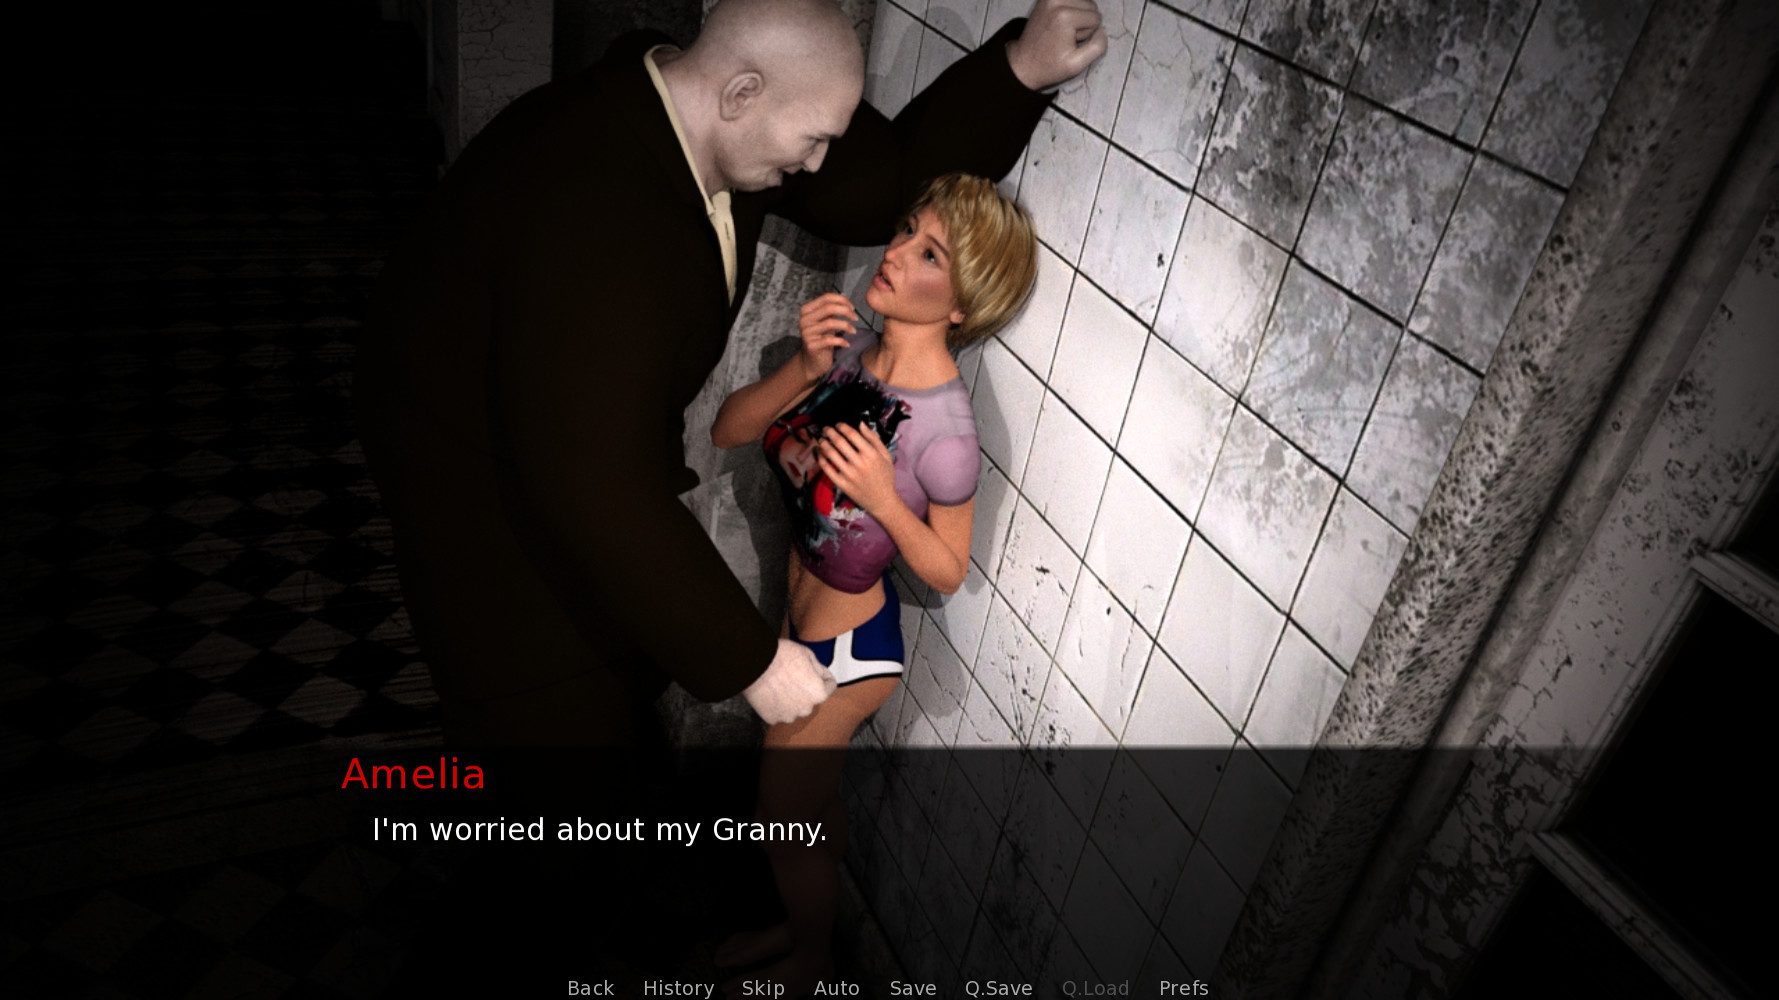 Steam Lists Game Called “Rape Day”: Visual Novel About Serial Killer/Rapist